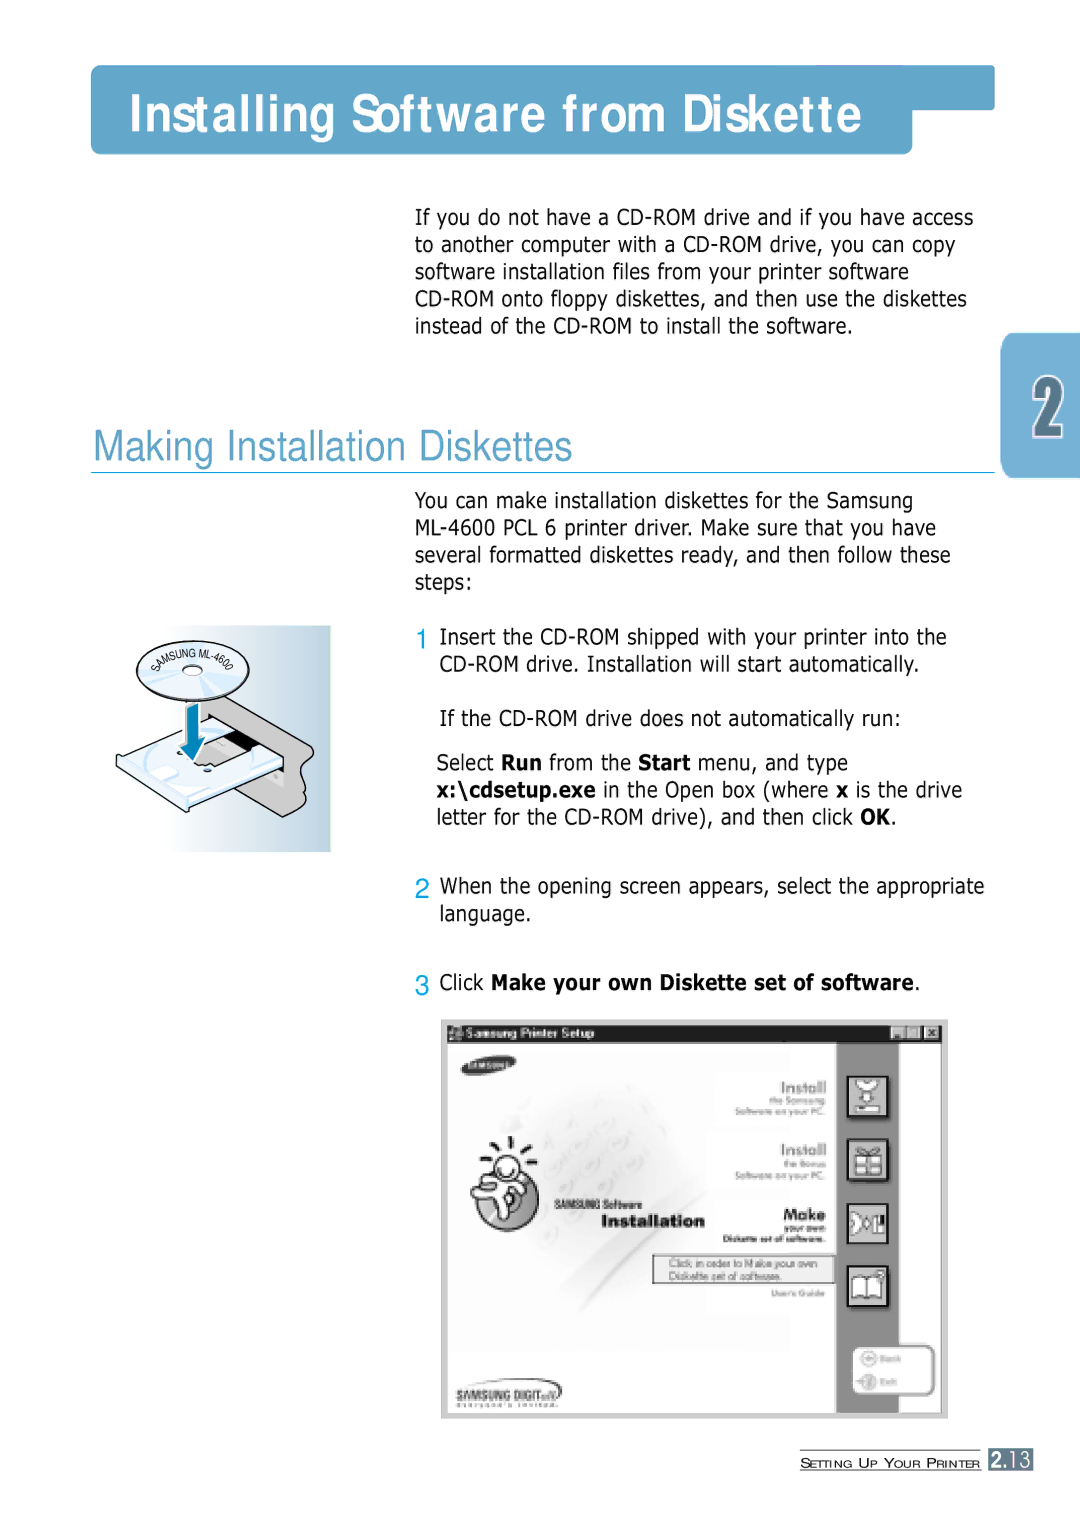 Samsung ML-4600 manual Installing Software from Diskette, Making Installation Diskettes 